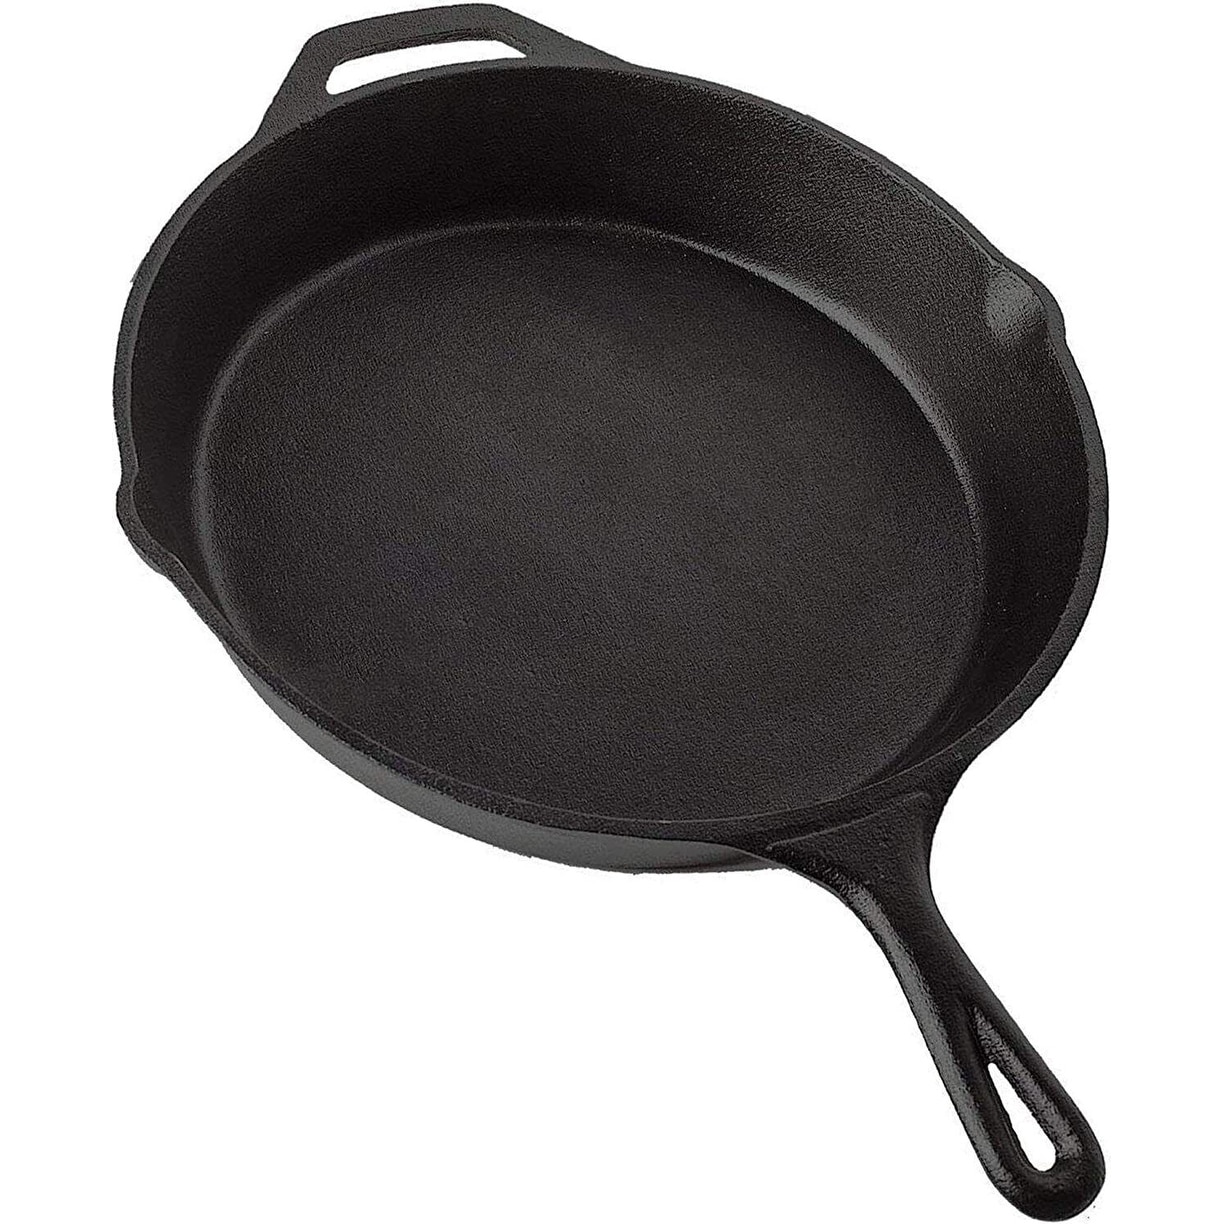 https://ak1.ostkcdn.com/images/products/is/images/direct/08b87f5447466a69c82833e04909aba7121e94e4/12-Inch-Pre-Seasoned-Cast-Iron-Skillet.jpg